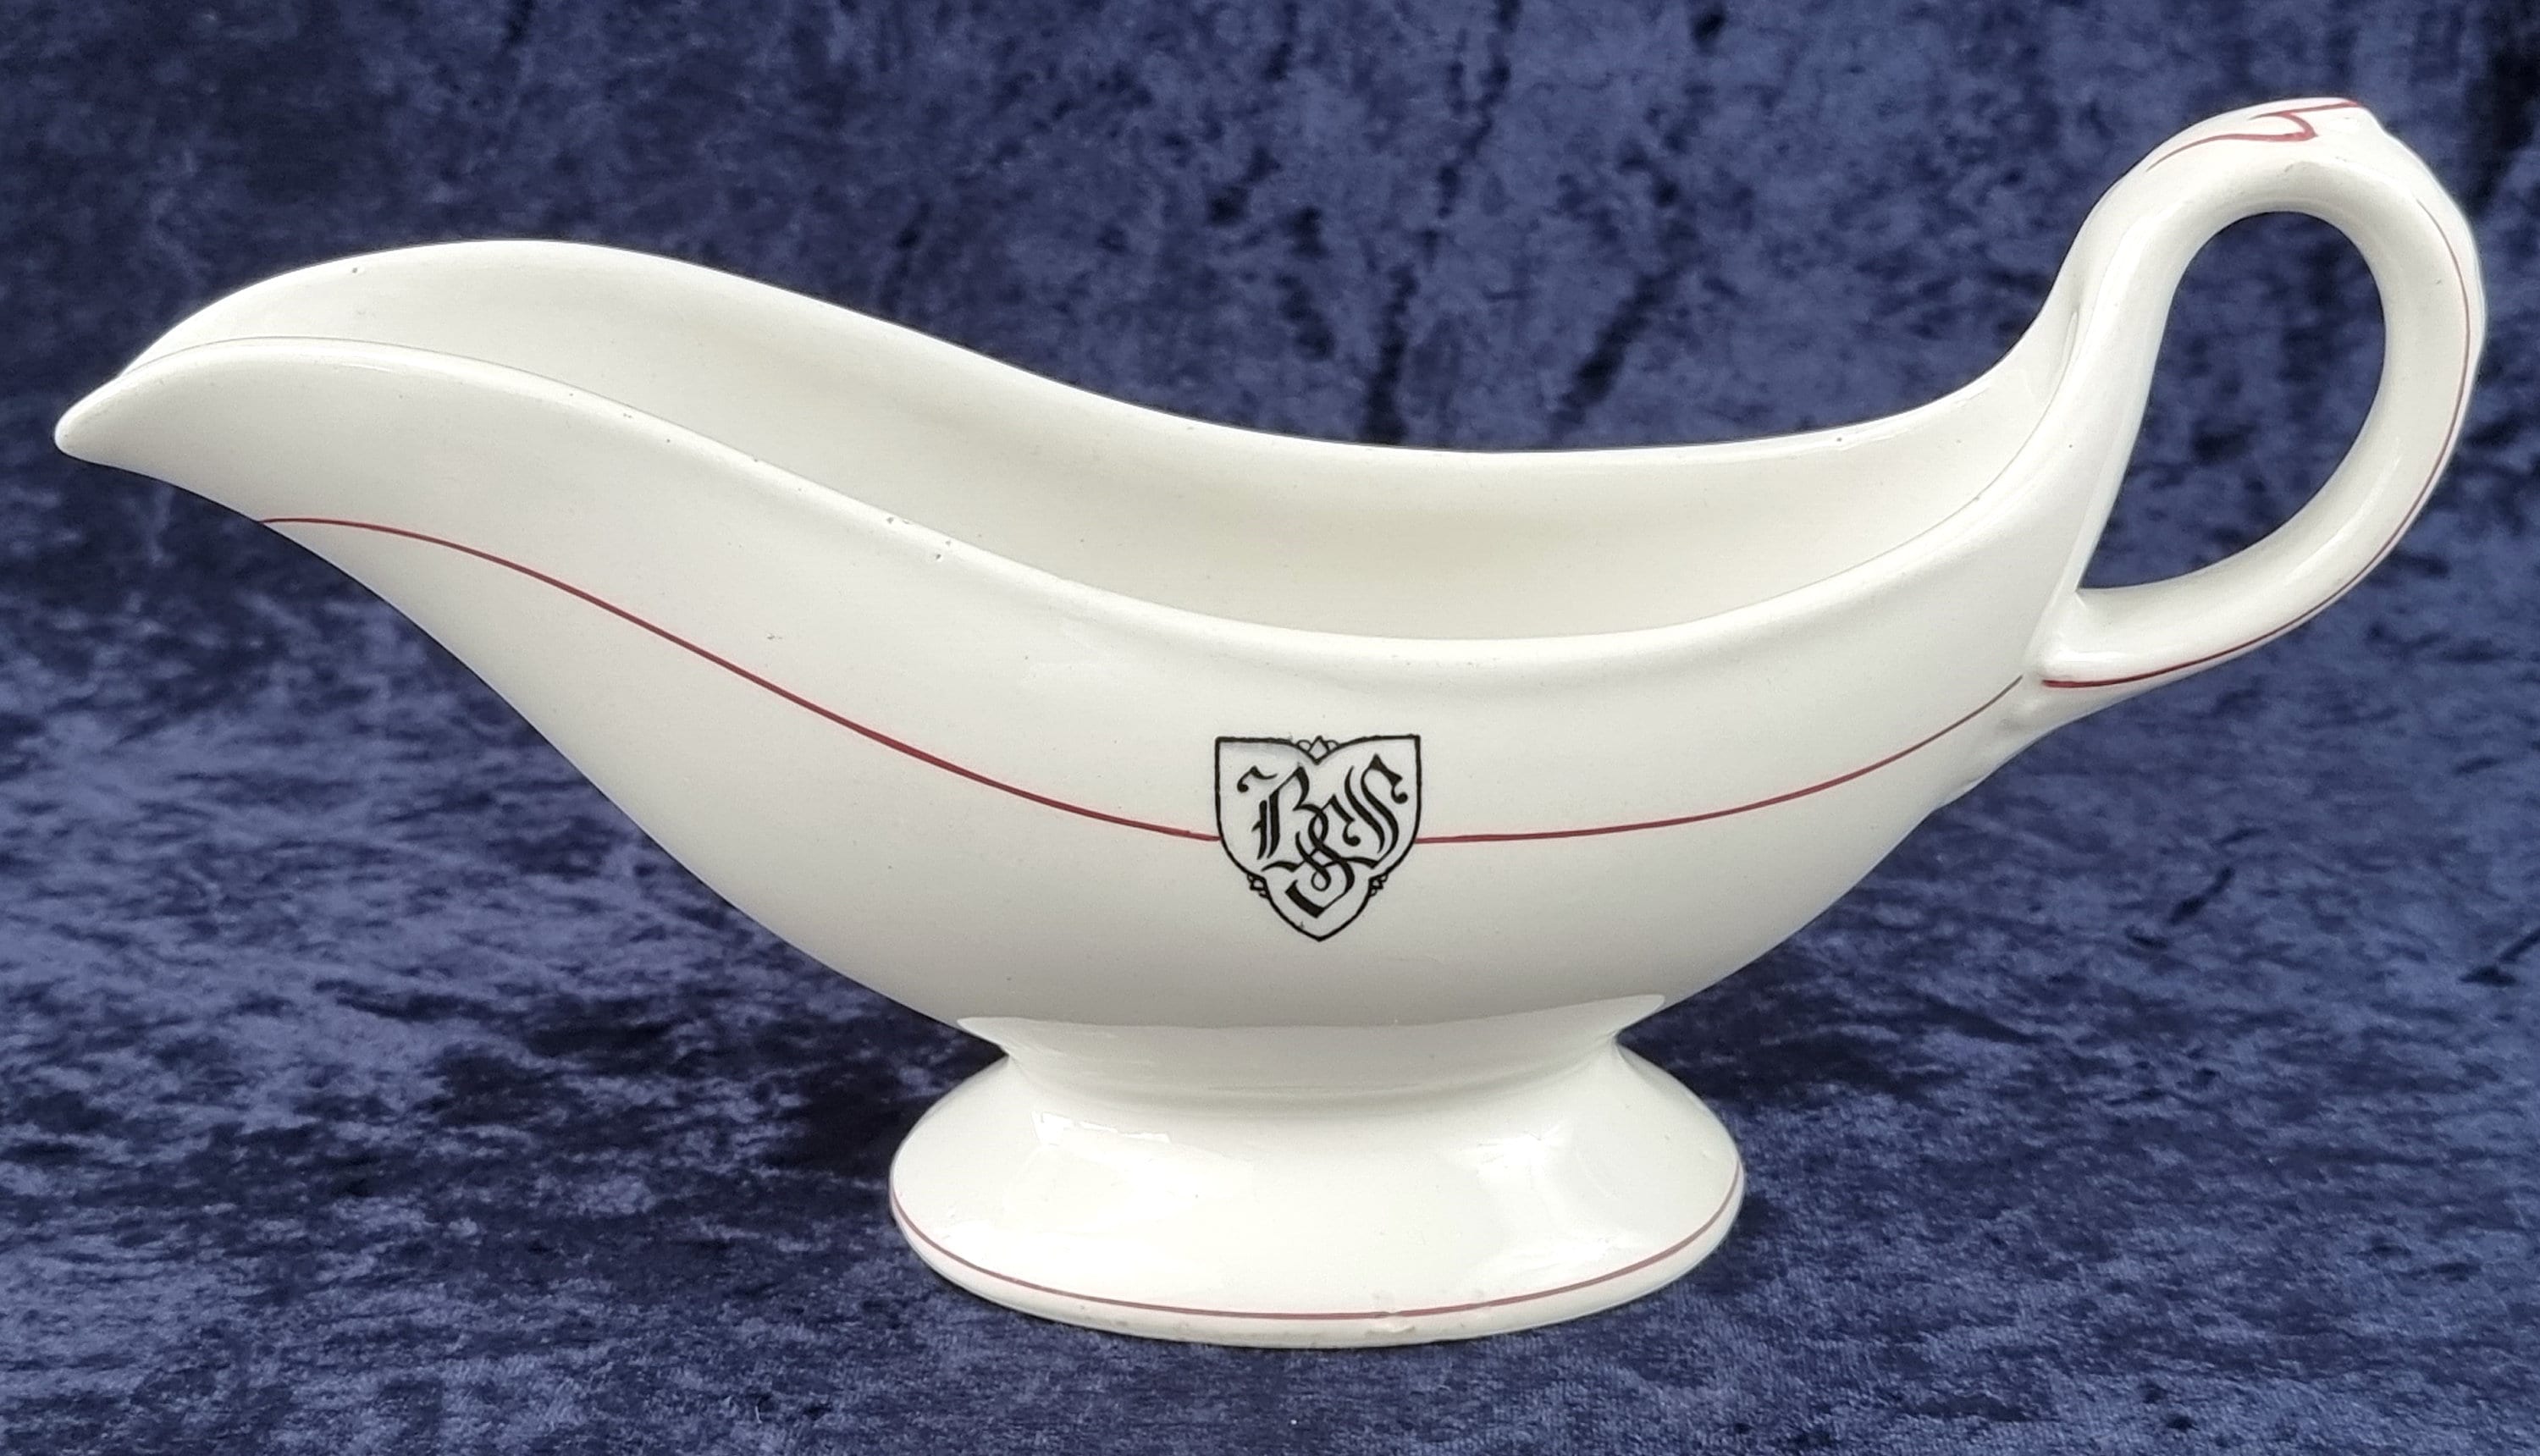 Historical Tableware, Gravy Boat, Sauce Boat, Bishop Strachan School, Red  and White, Canadian Interest, Grindley Hotel Ware, Cassidy's Ltd 